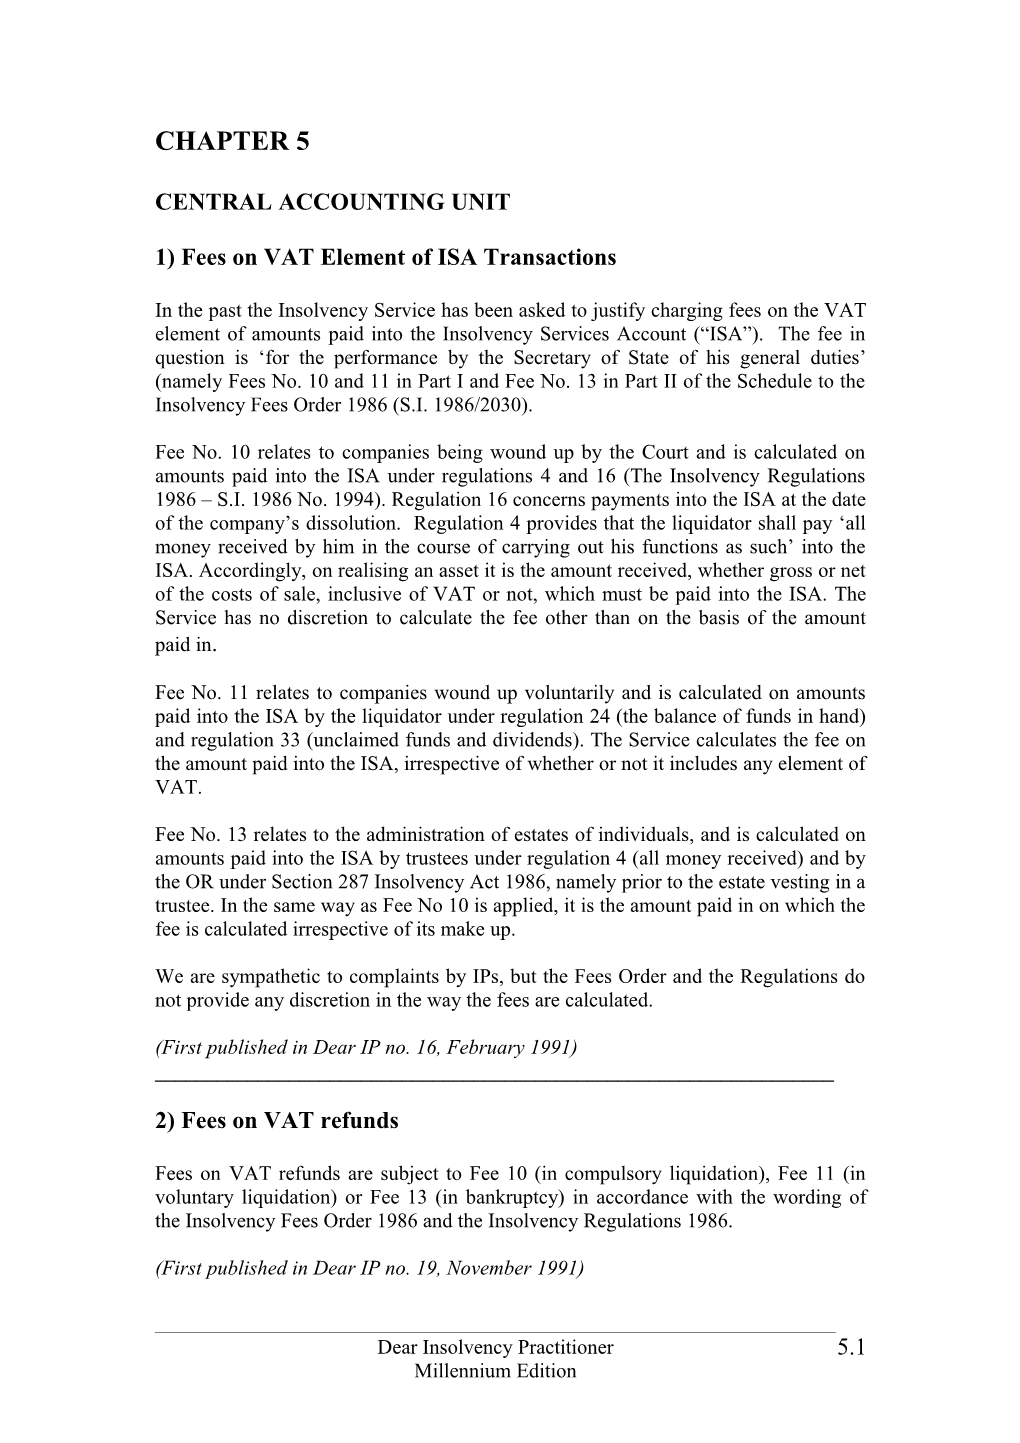 1) Fees on VAT Element of ISA Transactions